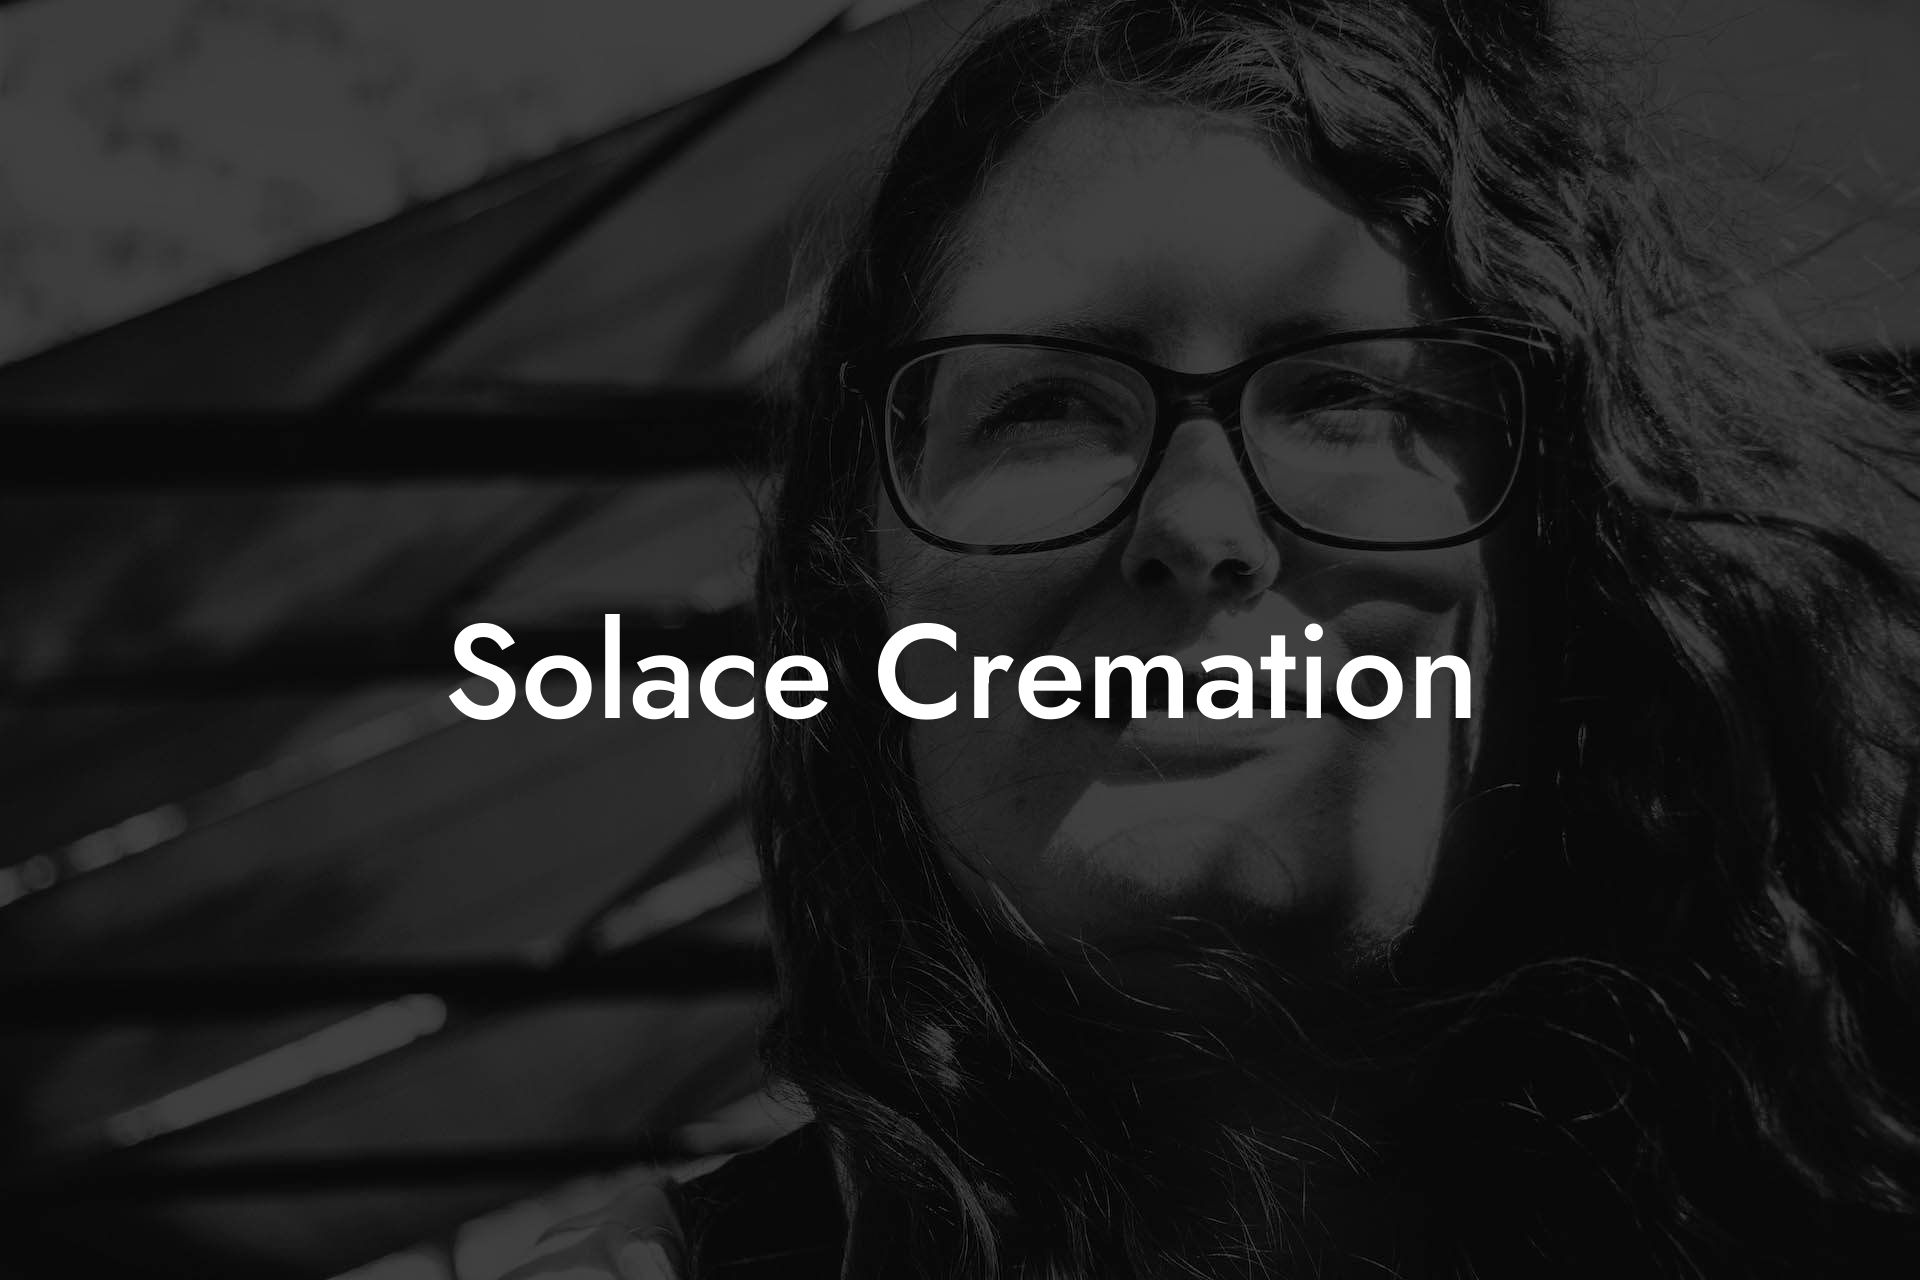 Solace Cremation